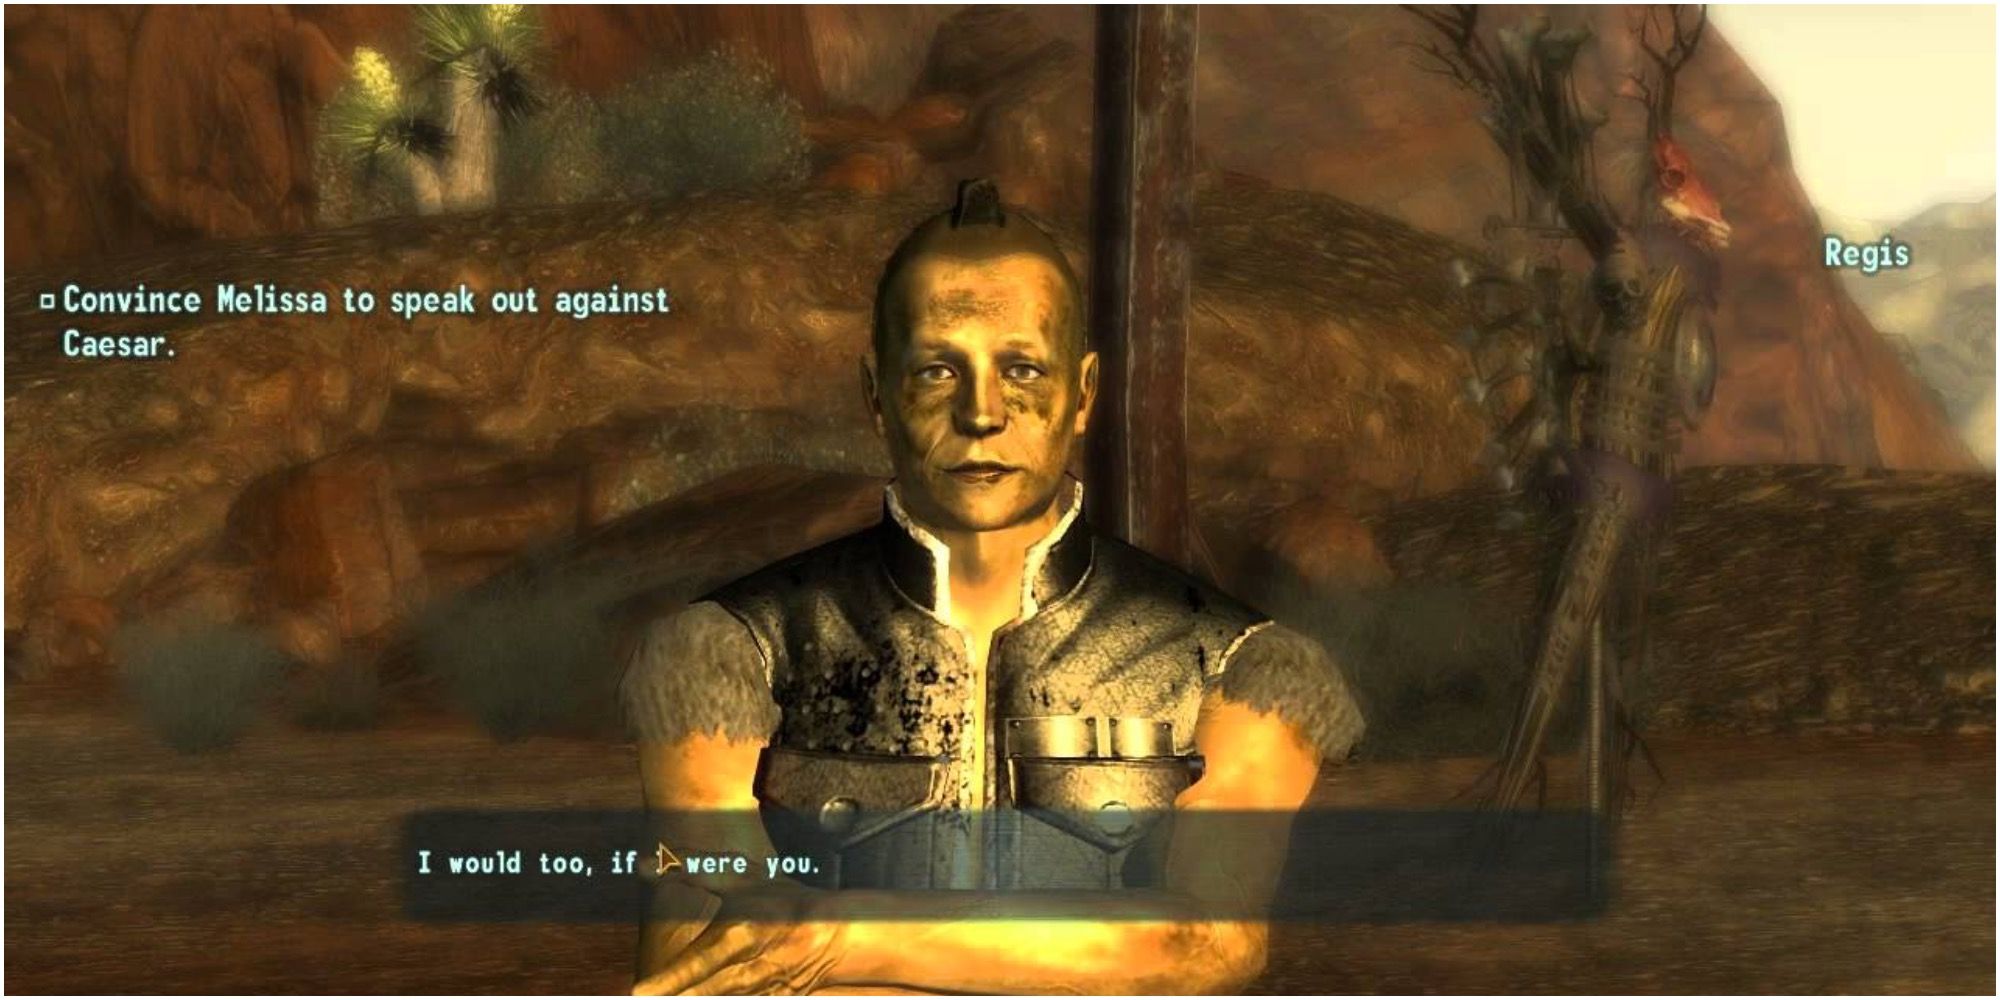 Speaking with Regis in Fallout New Vegas